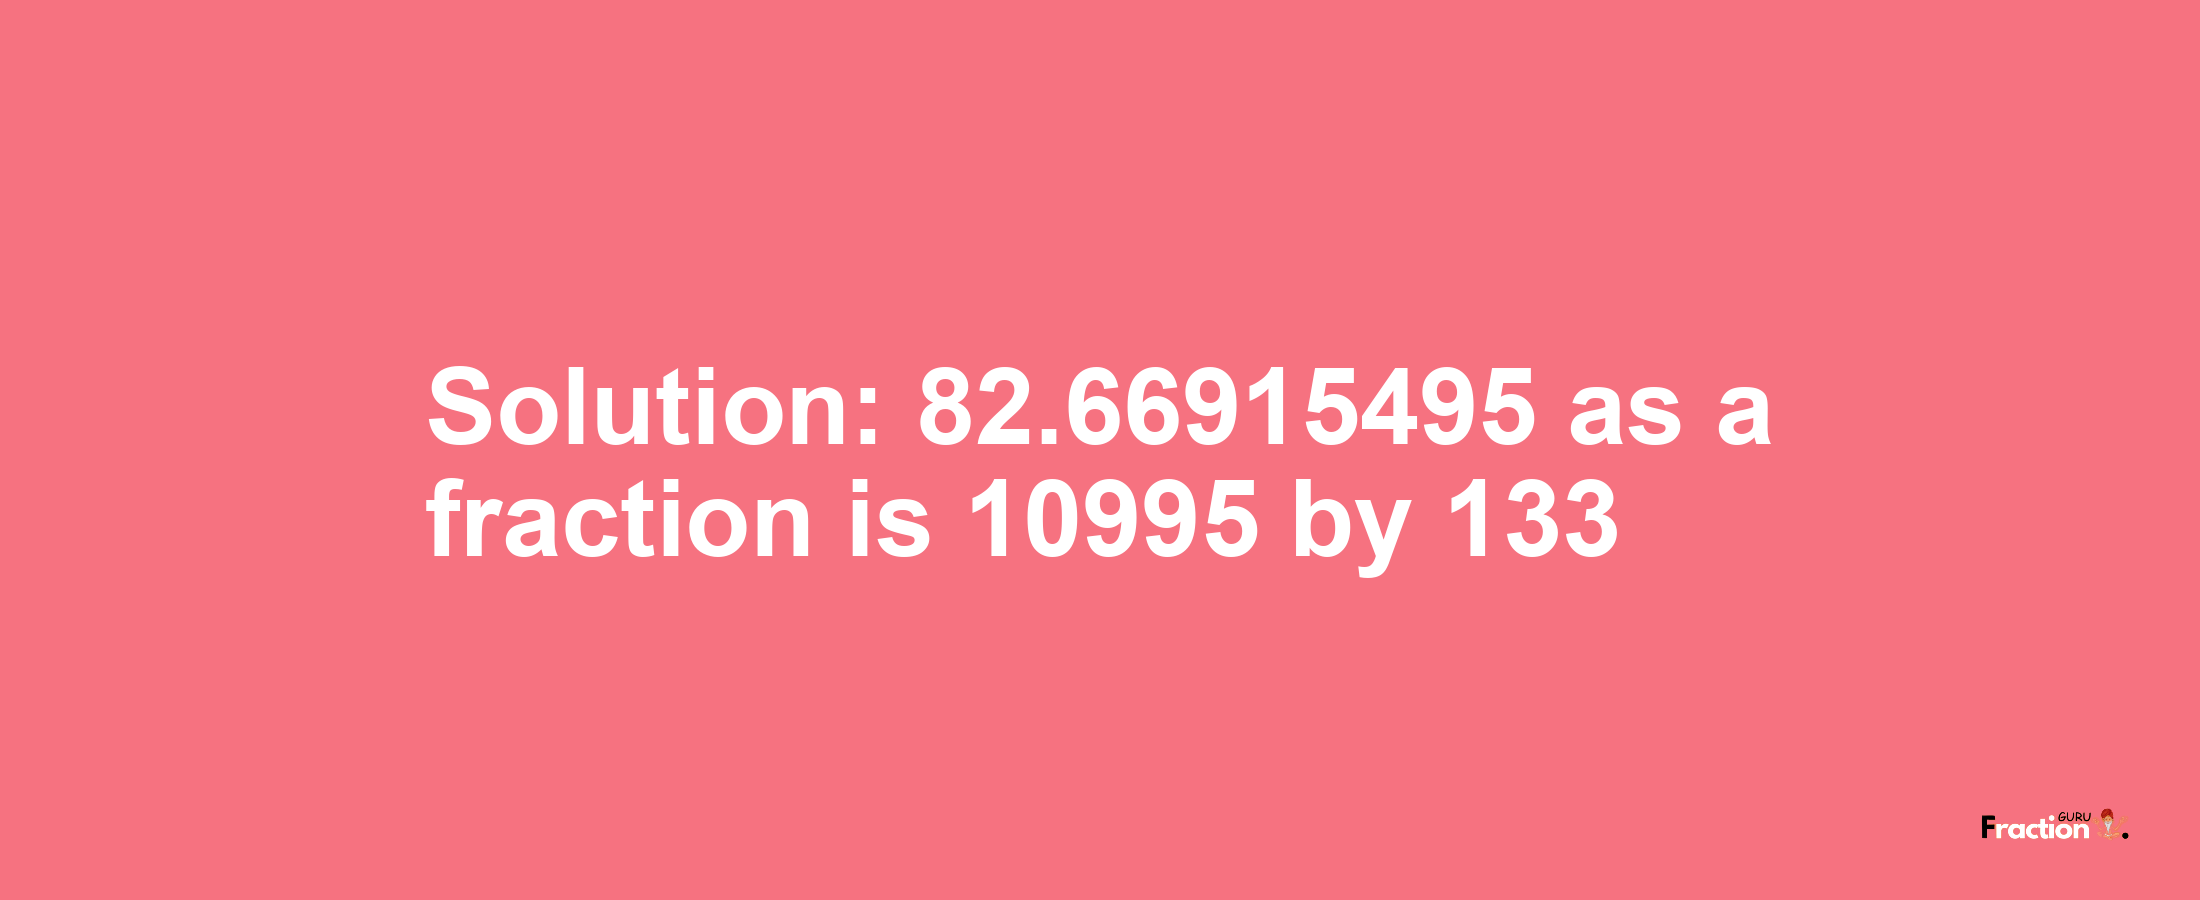 Solution:82.66915495 as a fraction is 10995/133